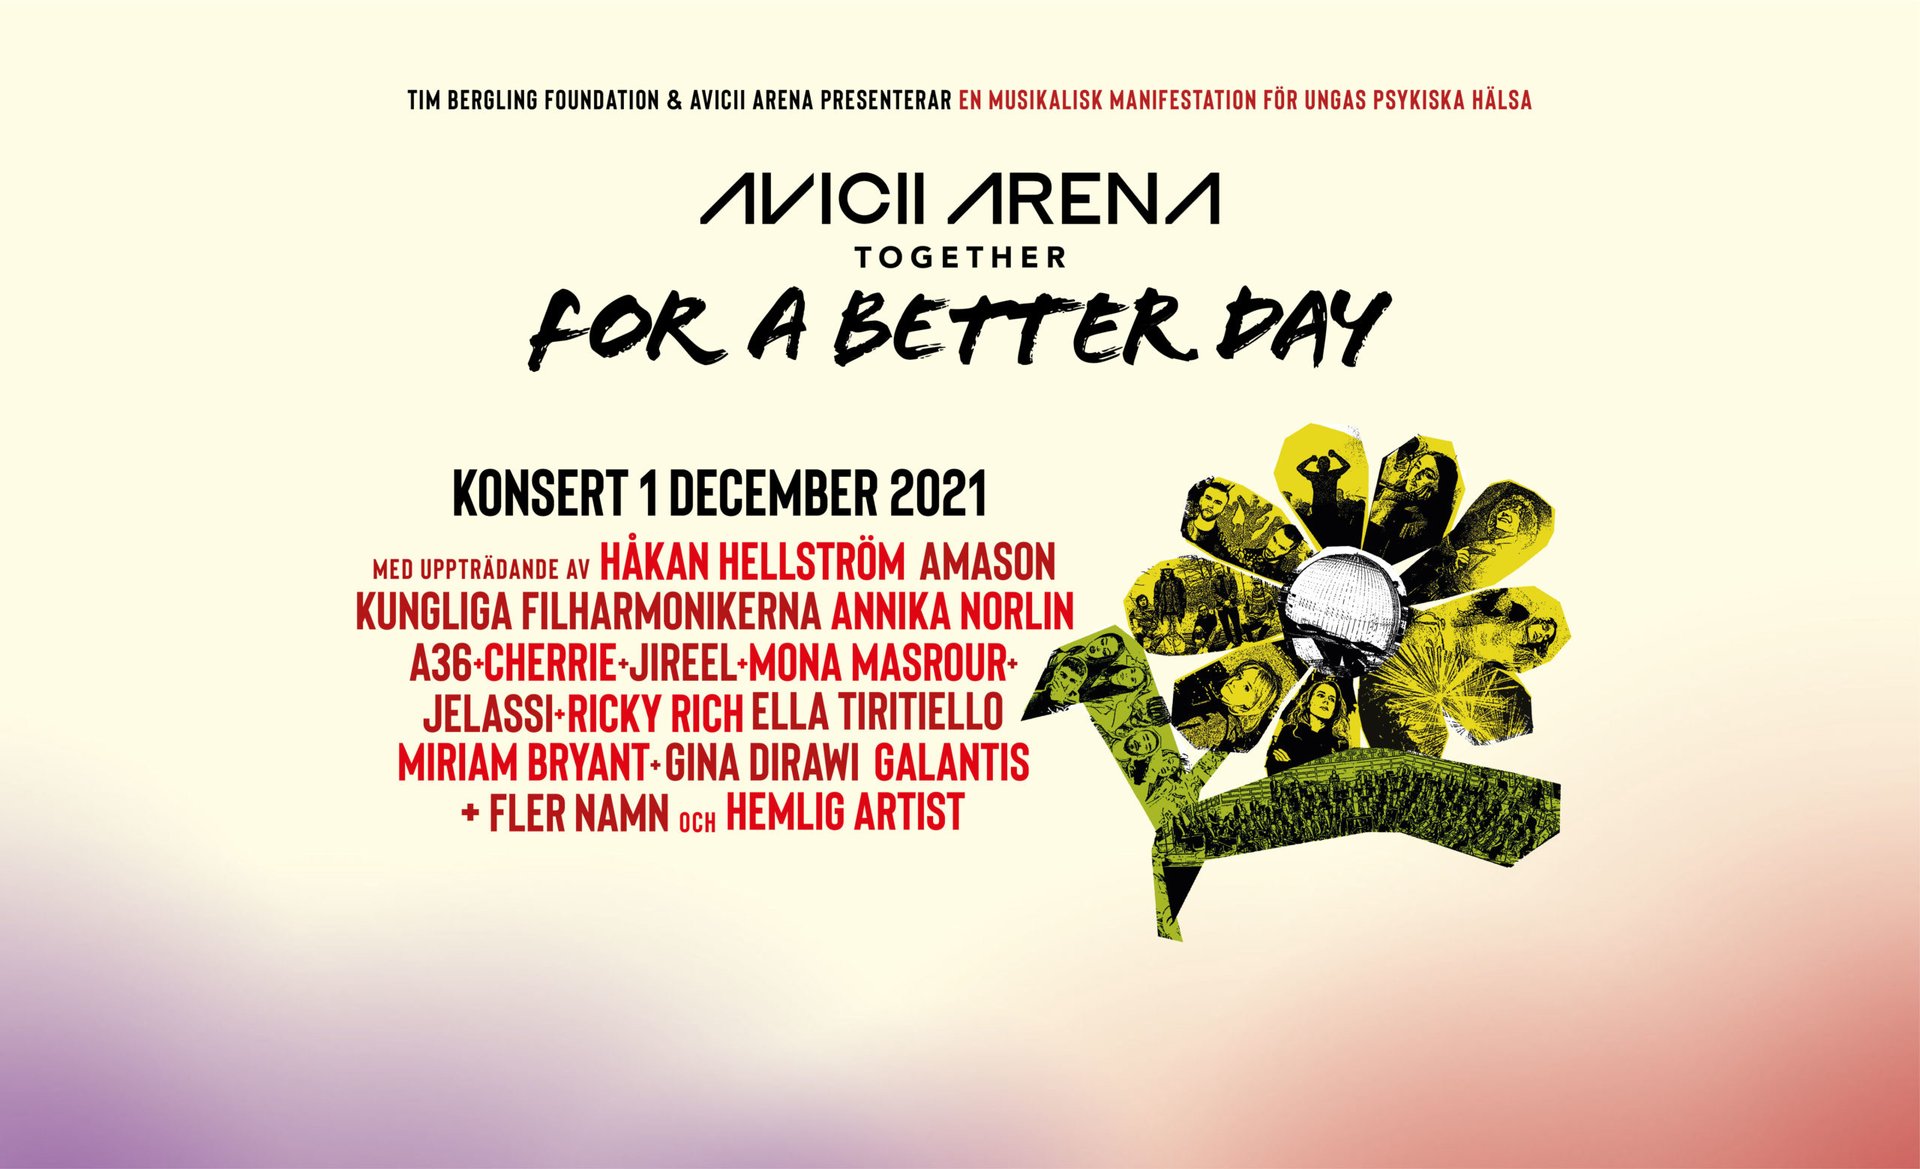 Avicii Arena Together for a Better Day concert lineup